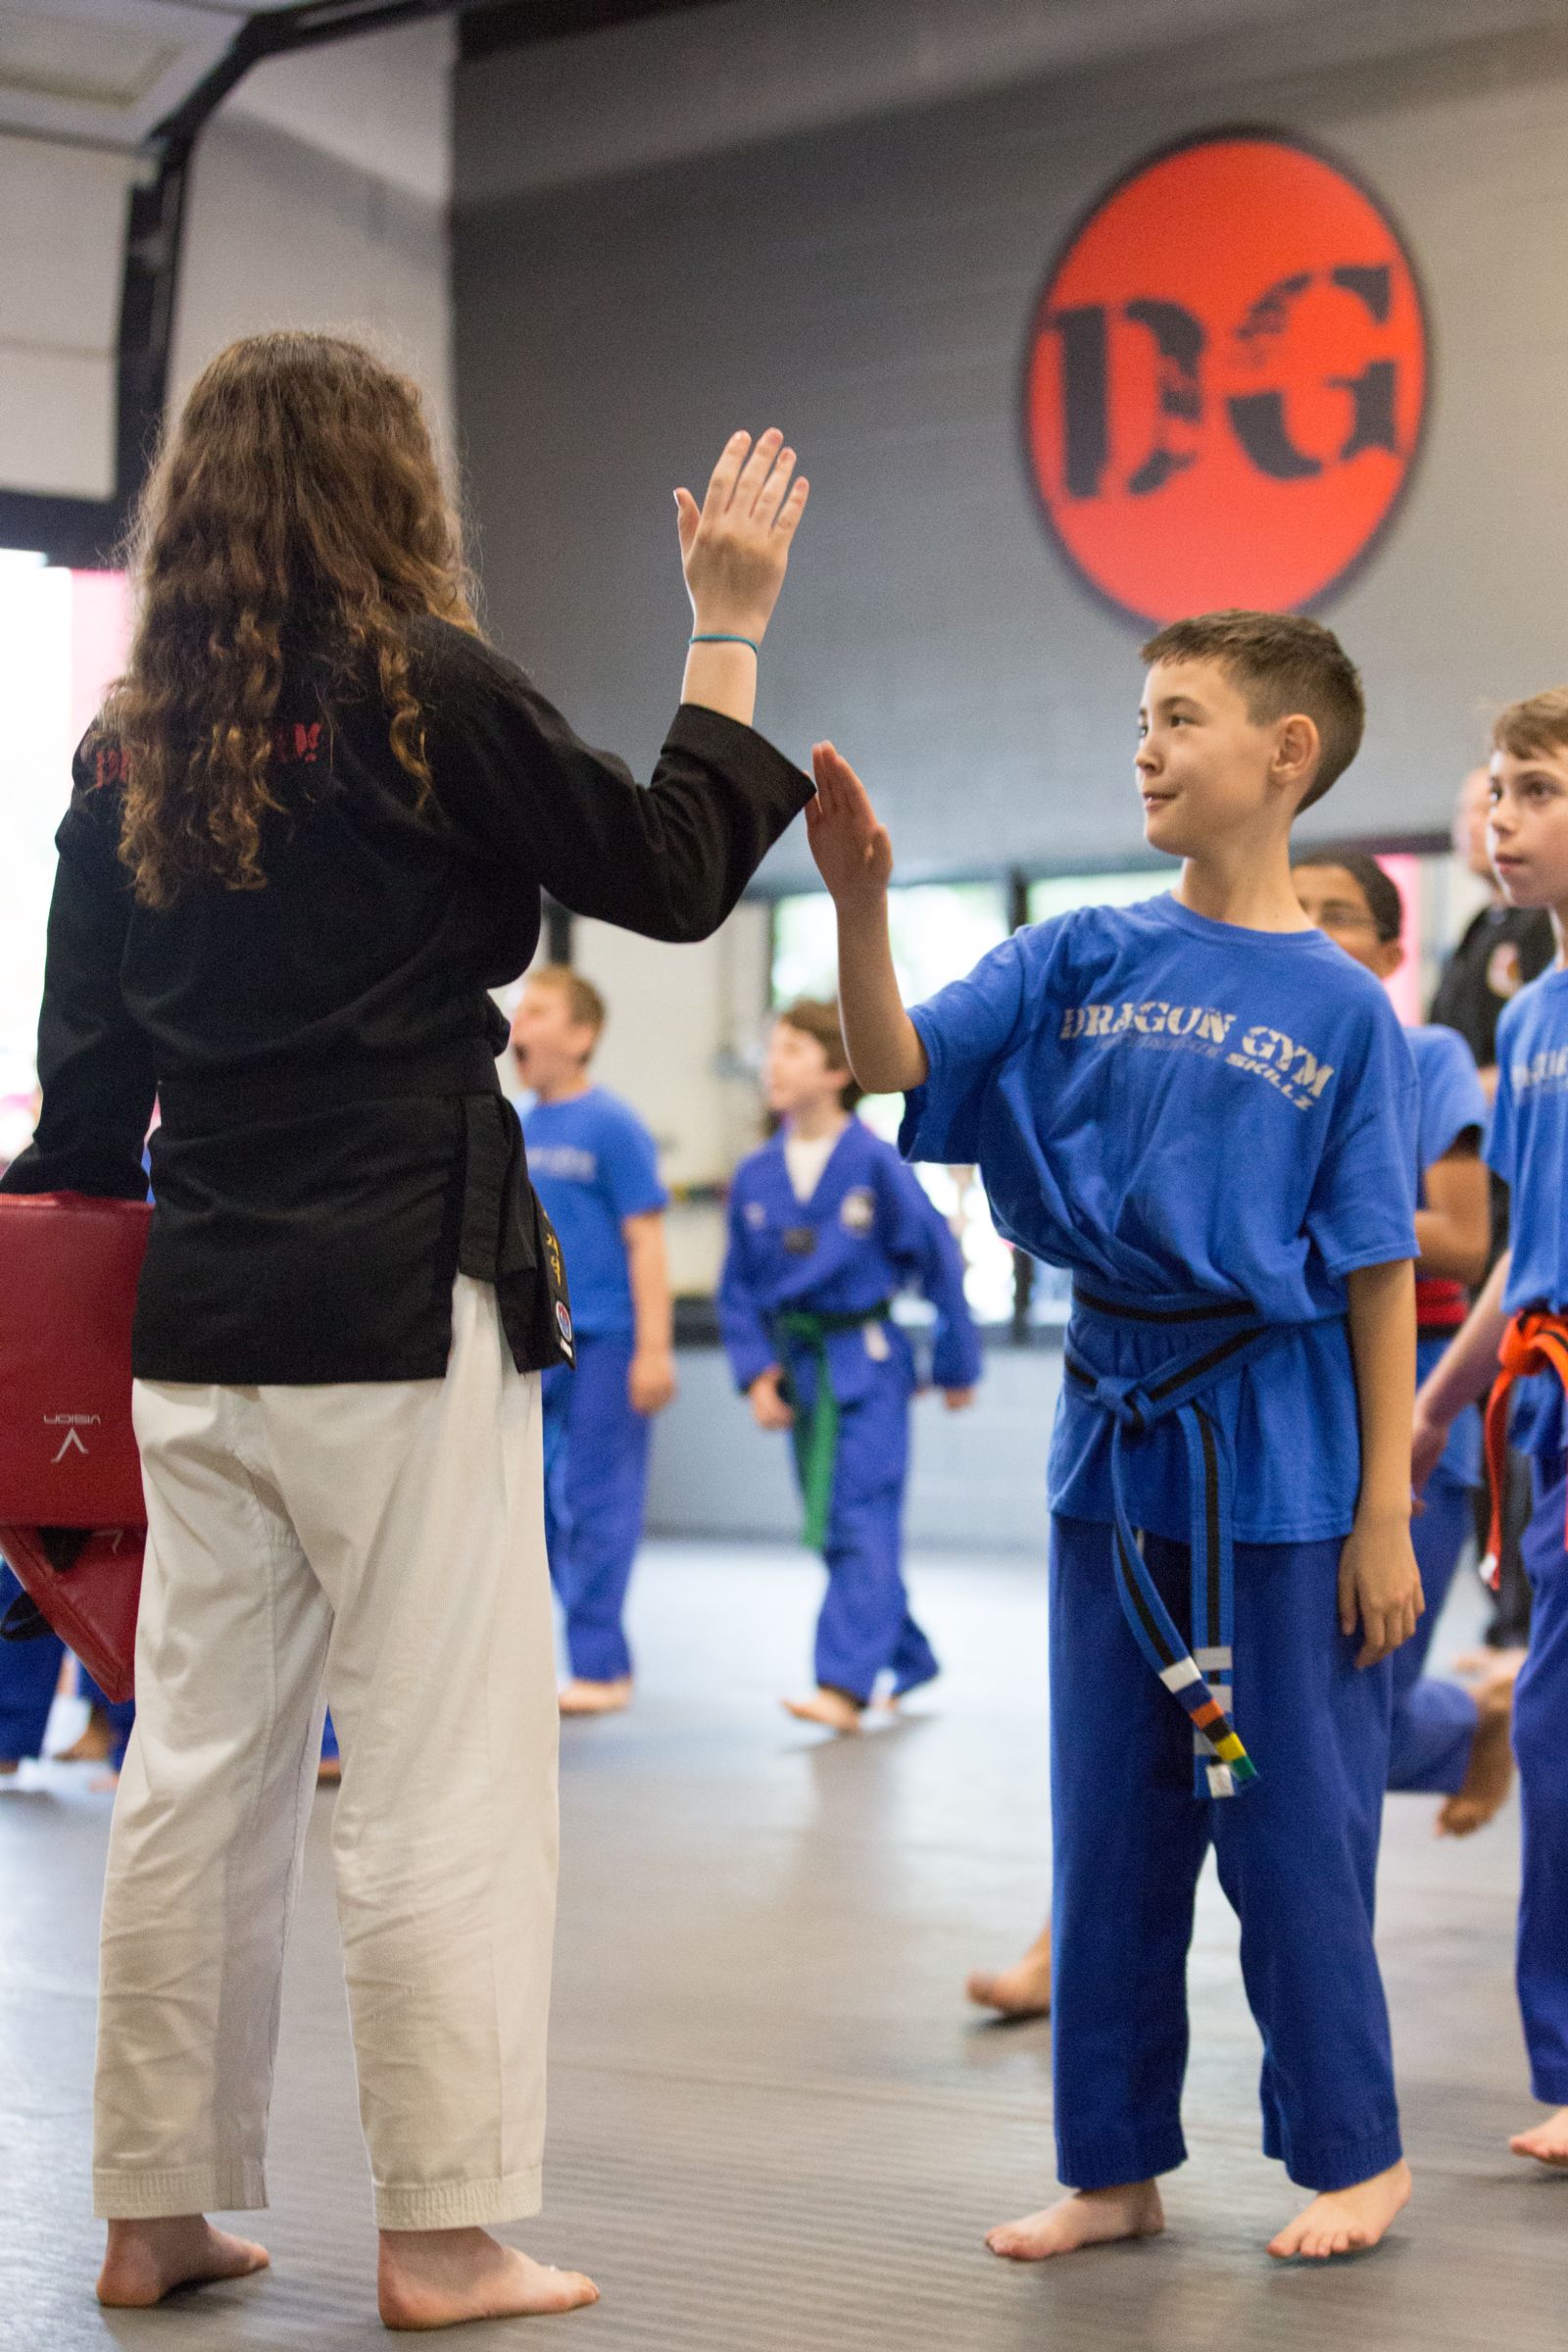 The Best Martial Arts Classes Near Me | Dragon Gym Martial Arts & Fitness